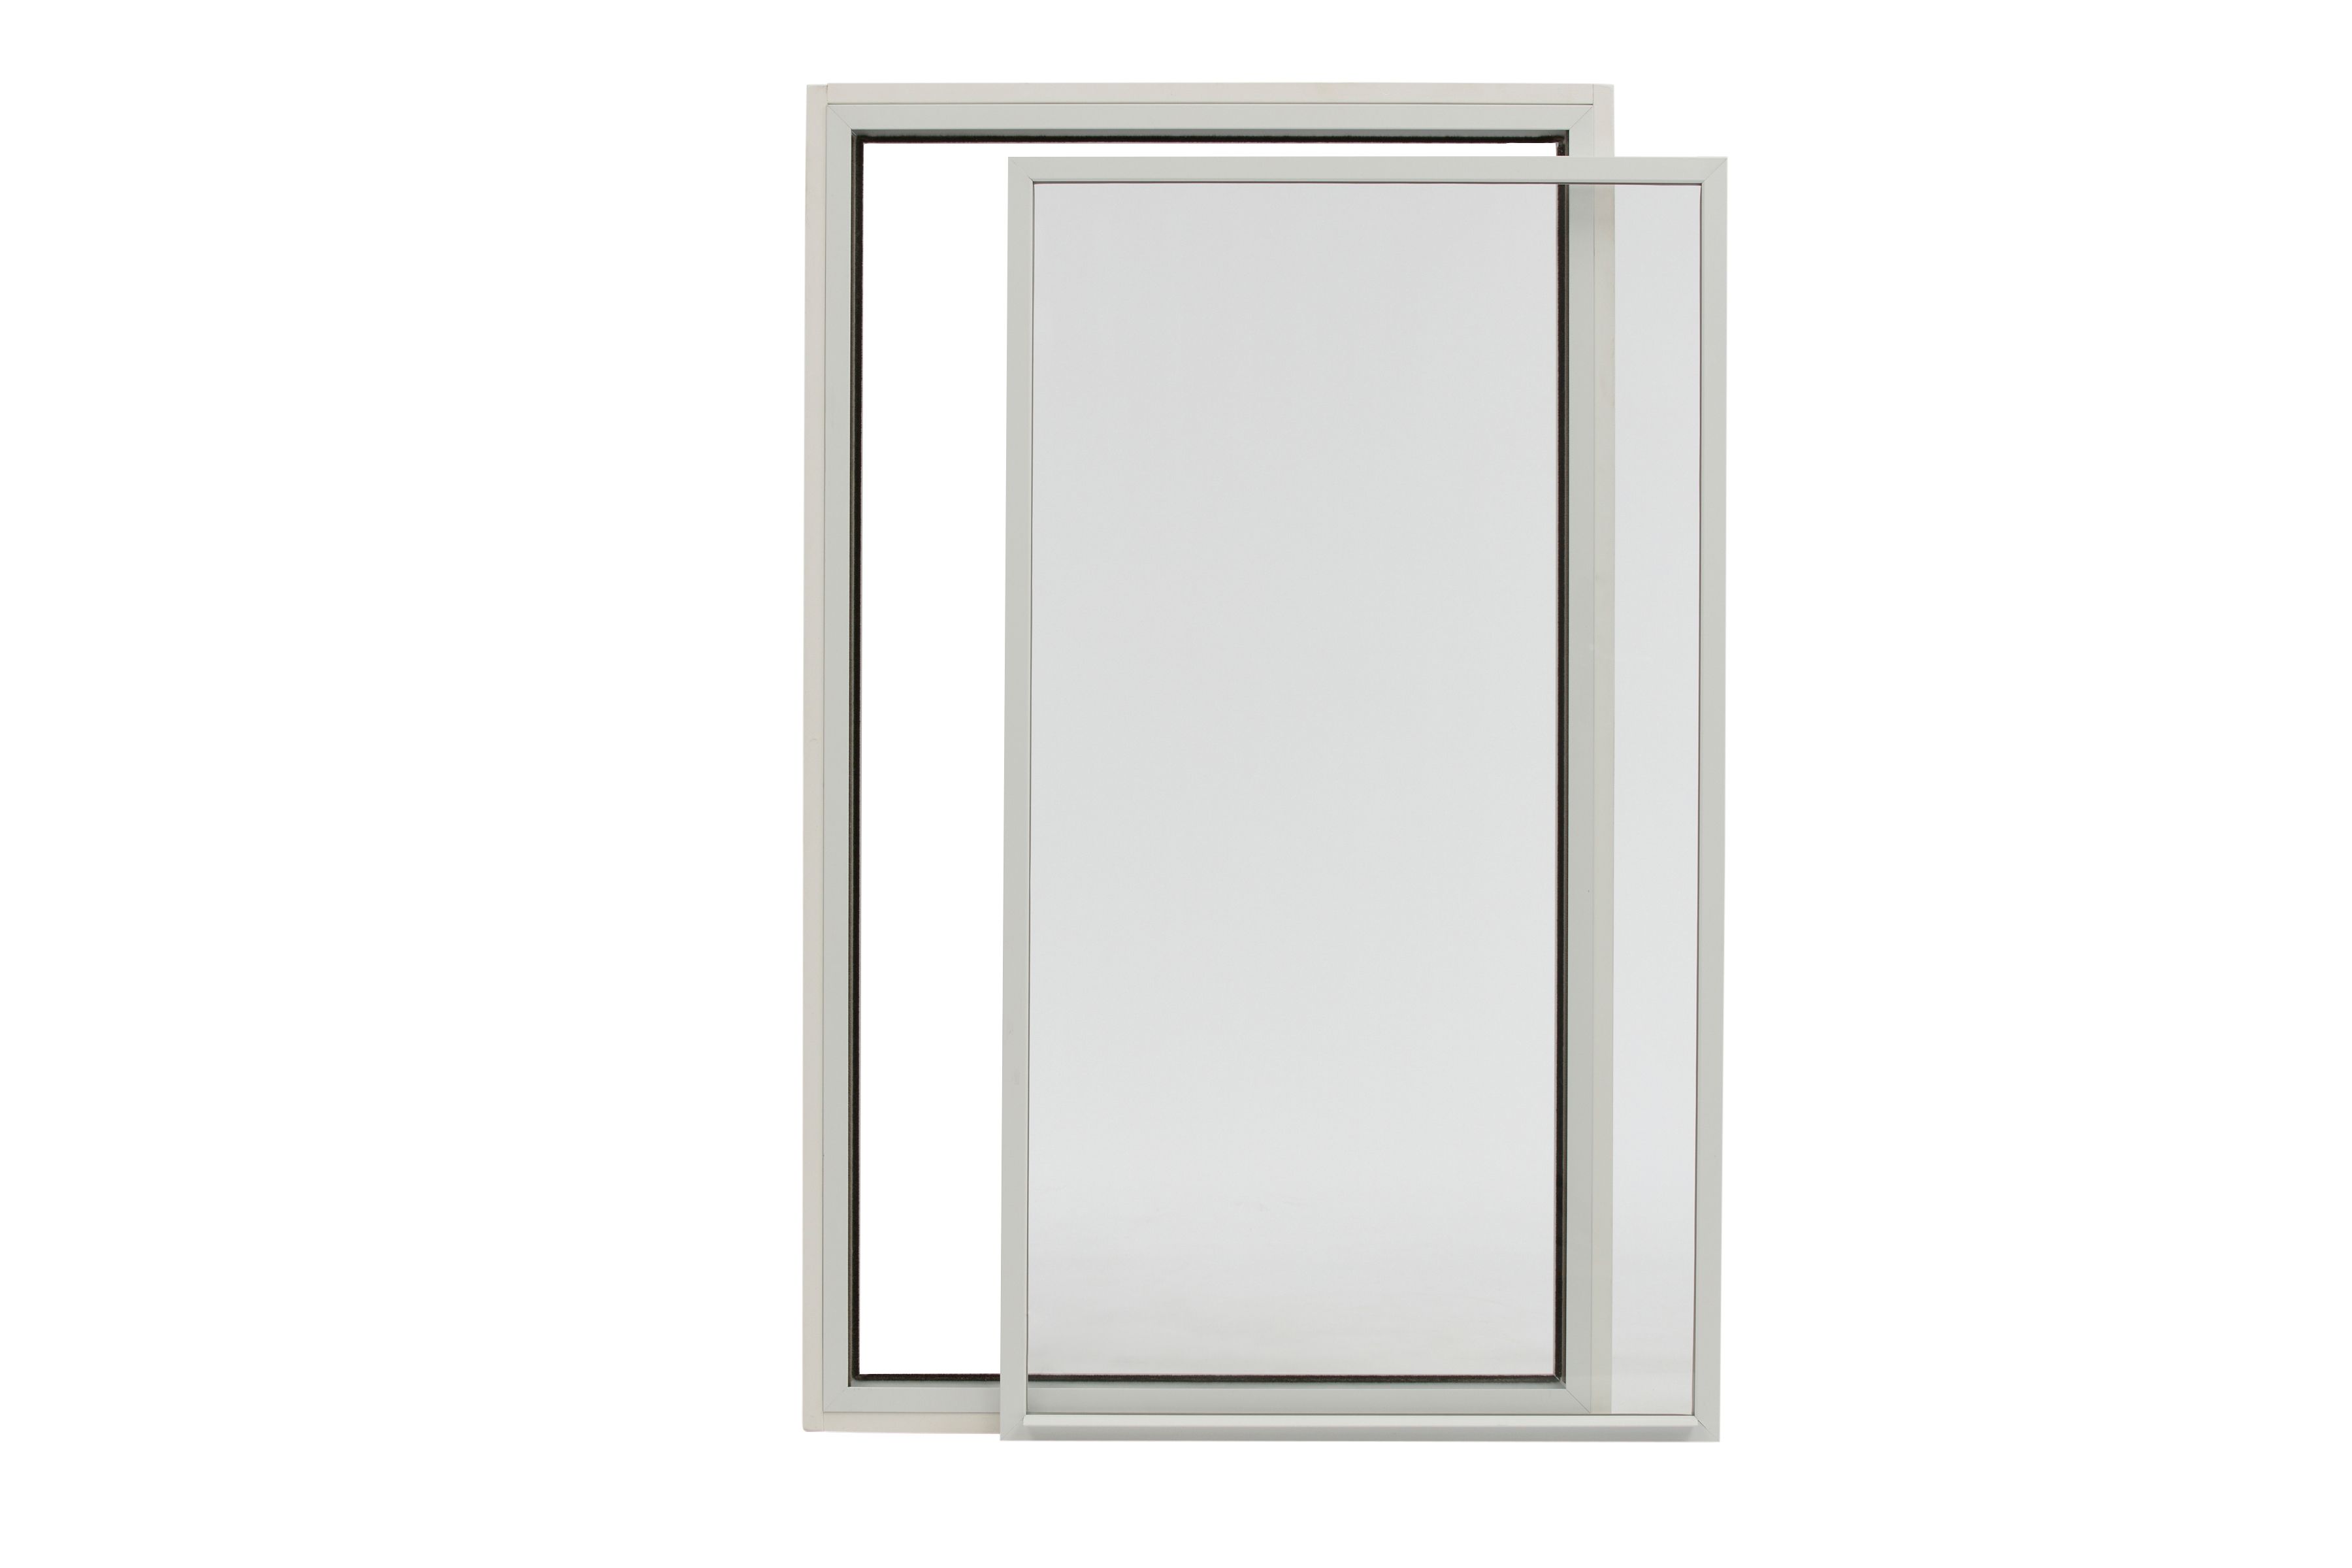 Buy Lift Out secondary glazing unit online today